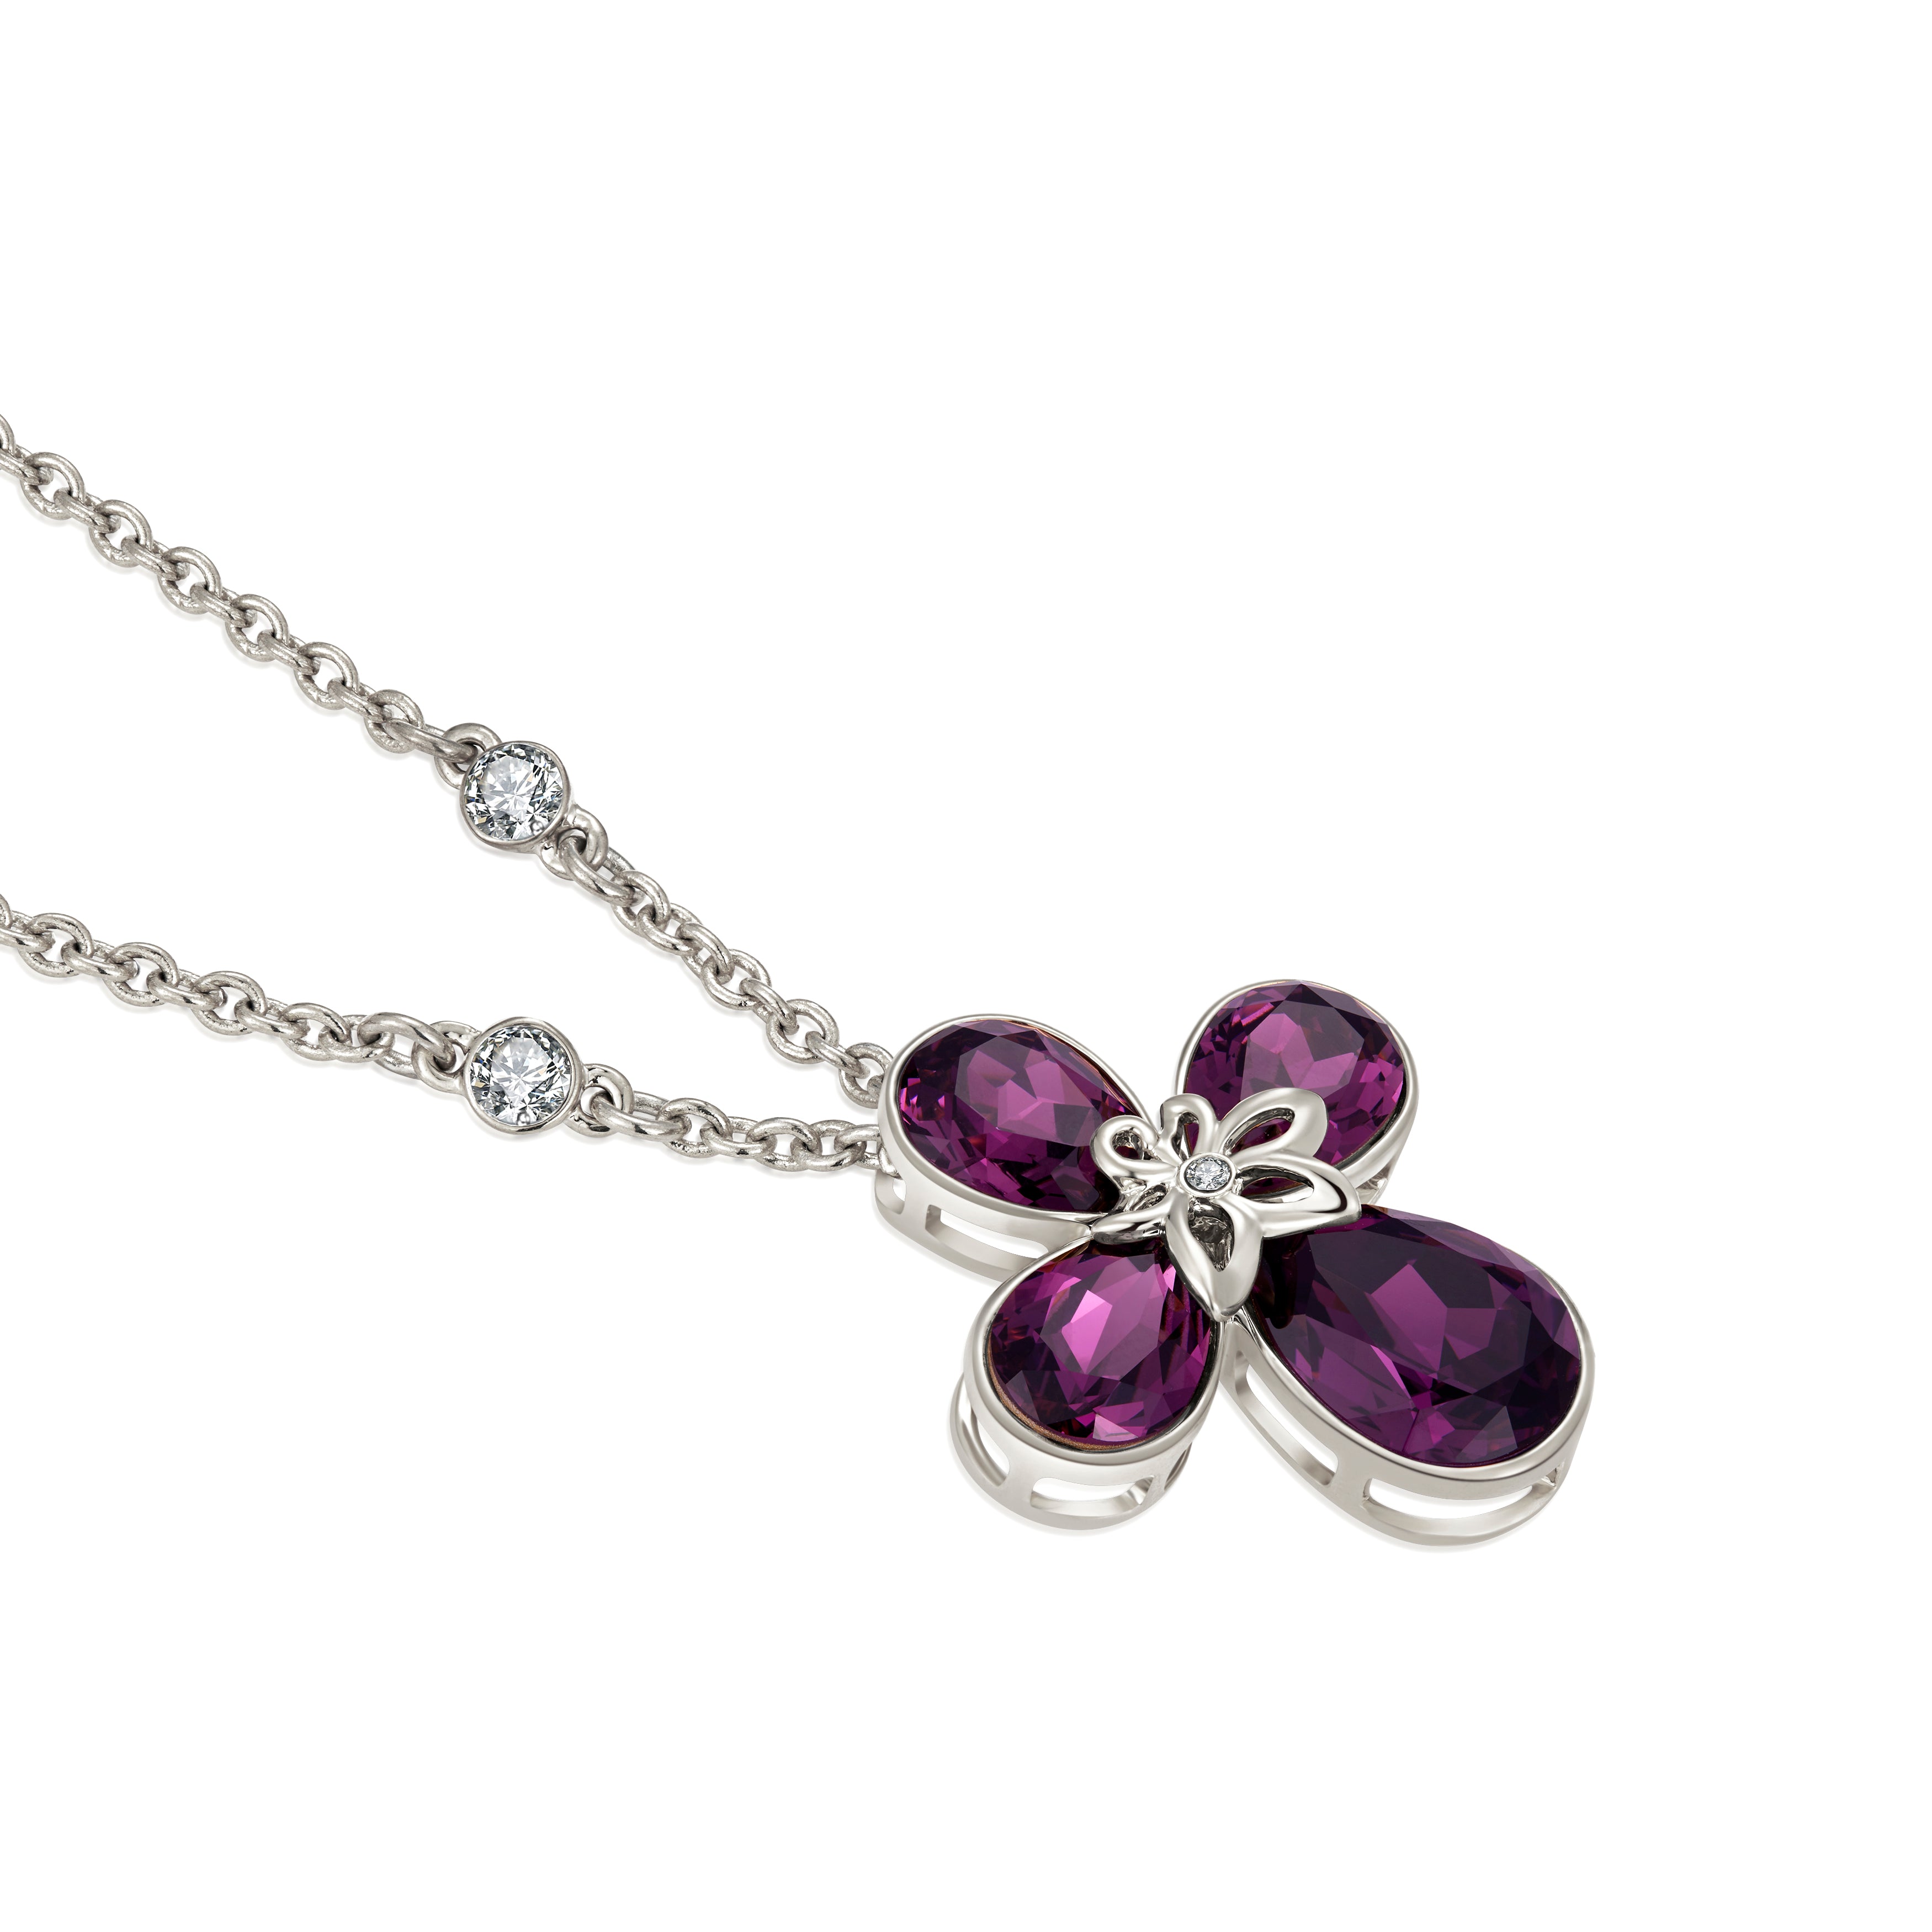 VICACCI White gold Four Leaf Clover Necklace，Embellished with crystals from Swarovski ; Lucky purple crystals